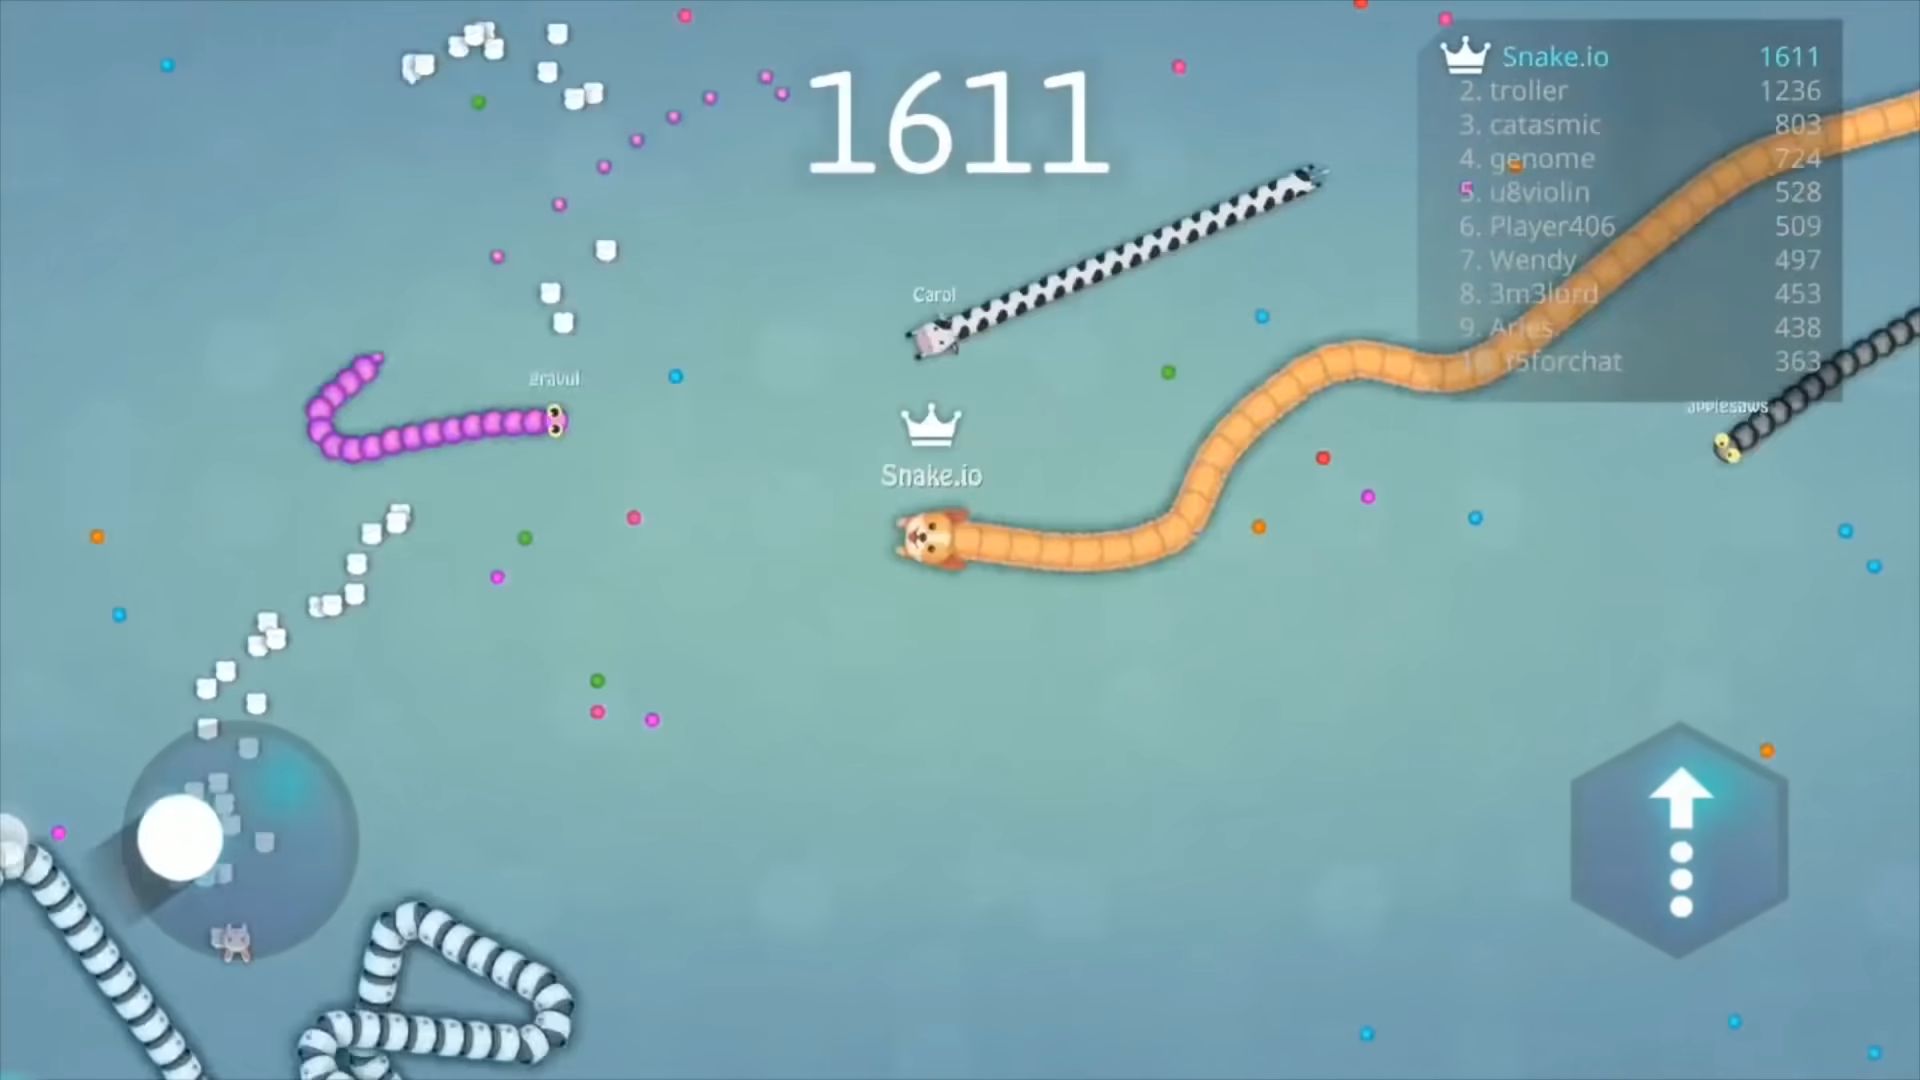 How to download slither.io on Android